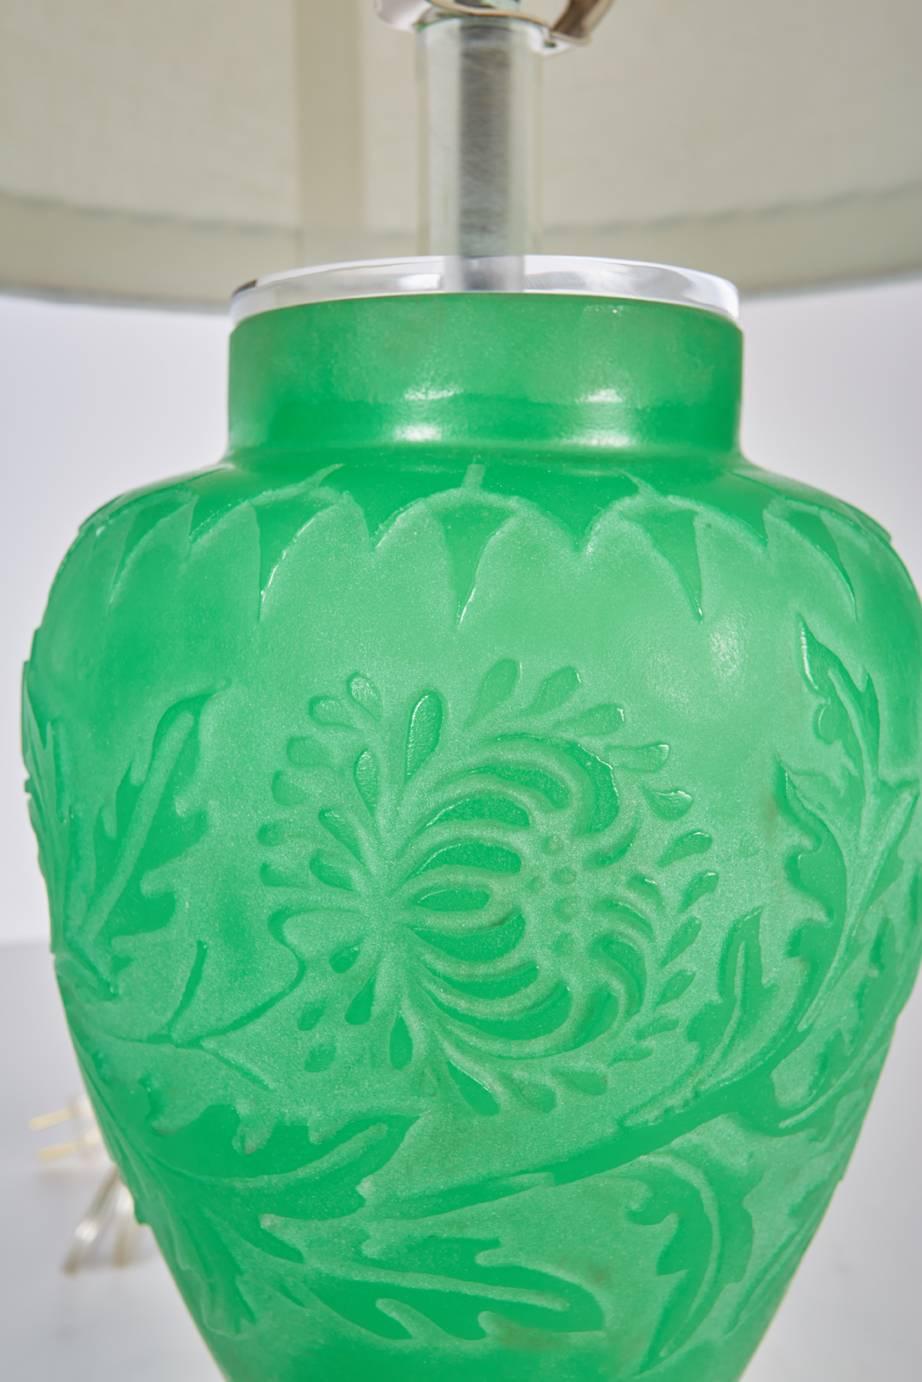 Steuben jade green acid cut back lamp in chrysanthemum pattern now mounted as a lamp with custom Lucite base and new, custom linen shade trimmed in twisted green and white cording.